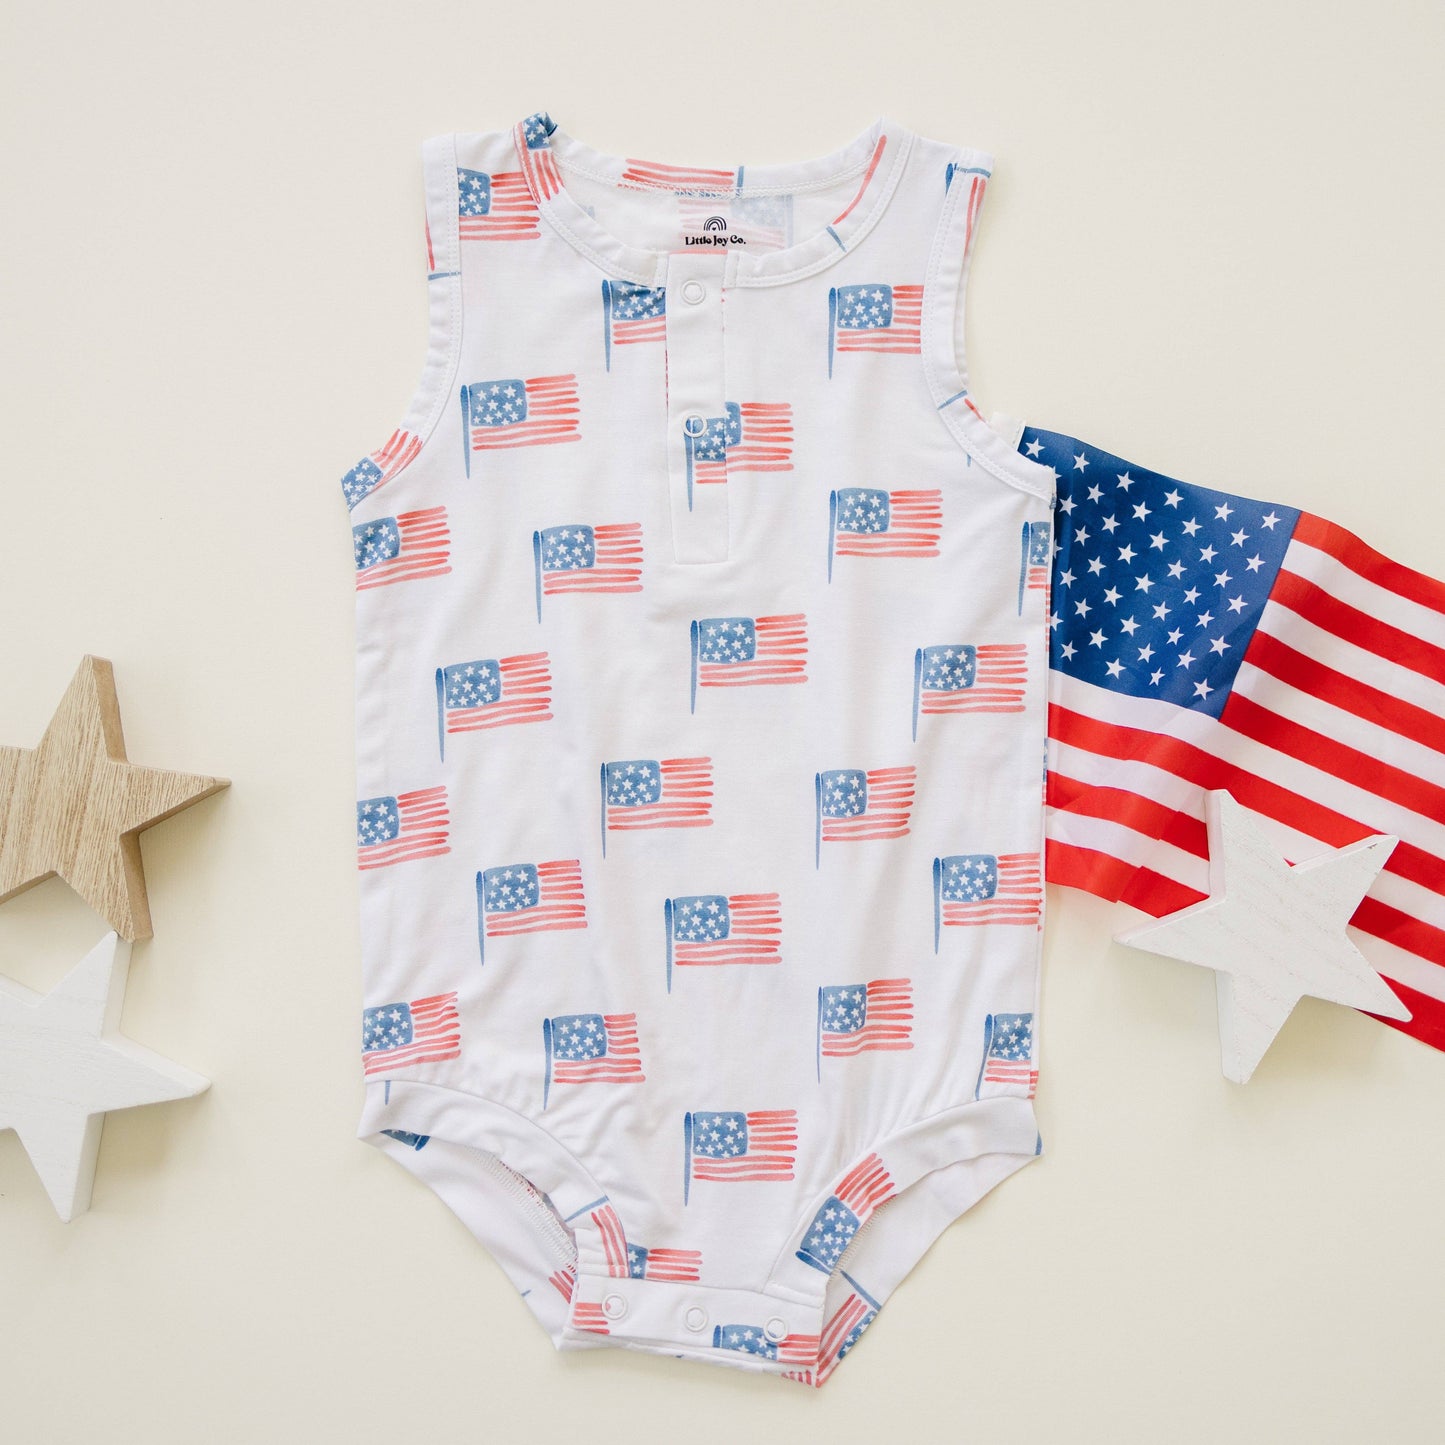 Little Joy Co. - Flag Print Bamboo Baby Romper 4th of July Outfit Sleeveless